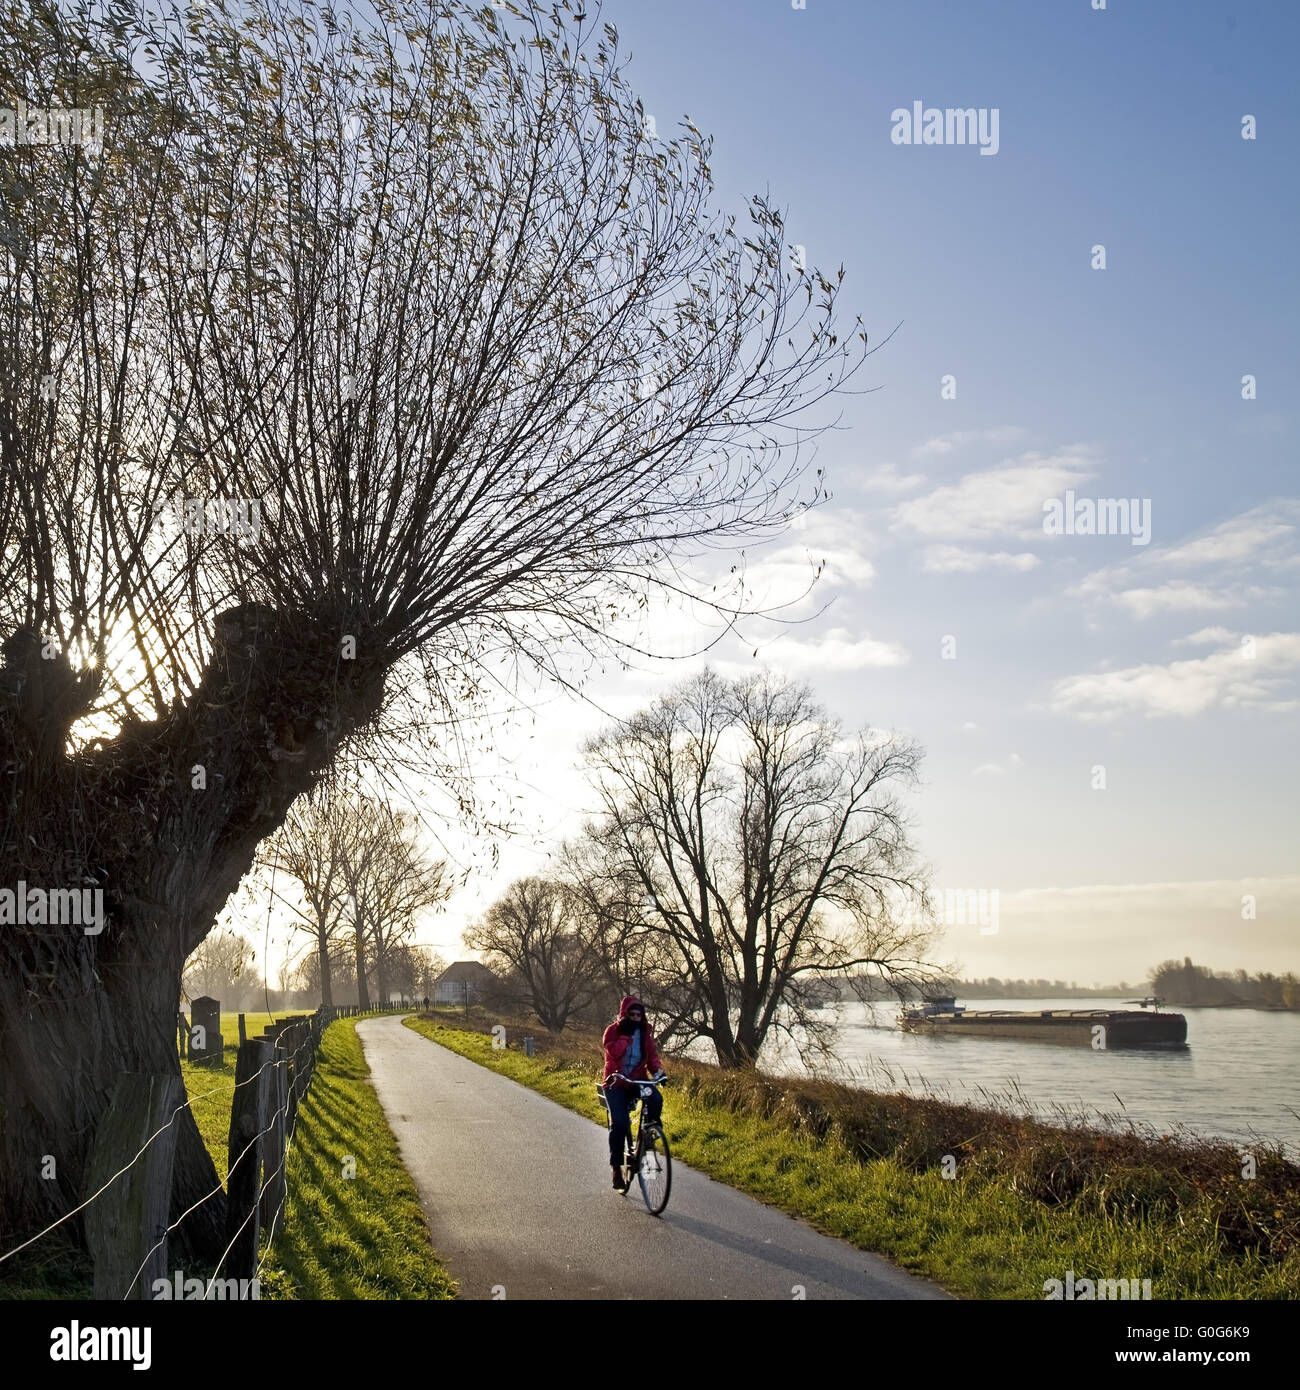 Cyclists in Lower Rhine landscape with pollarded willows, Duesseldorf-Wittlaer, Germany, Europe Stock Photo